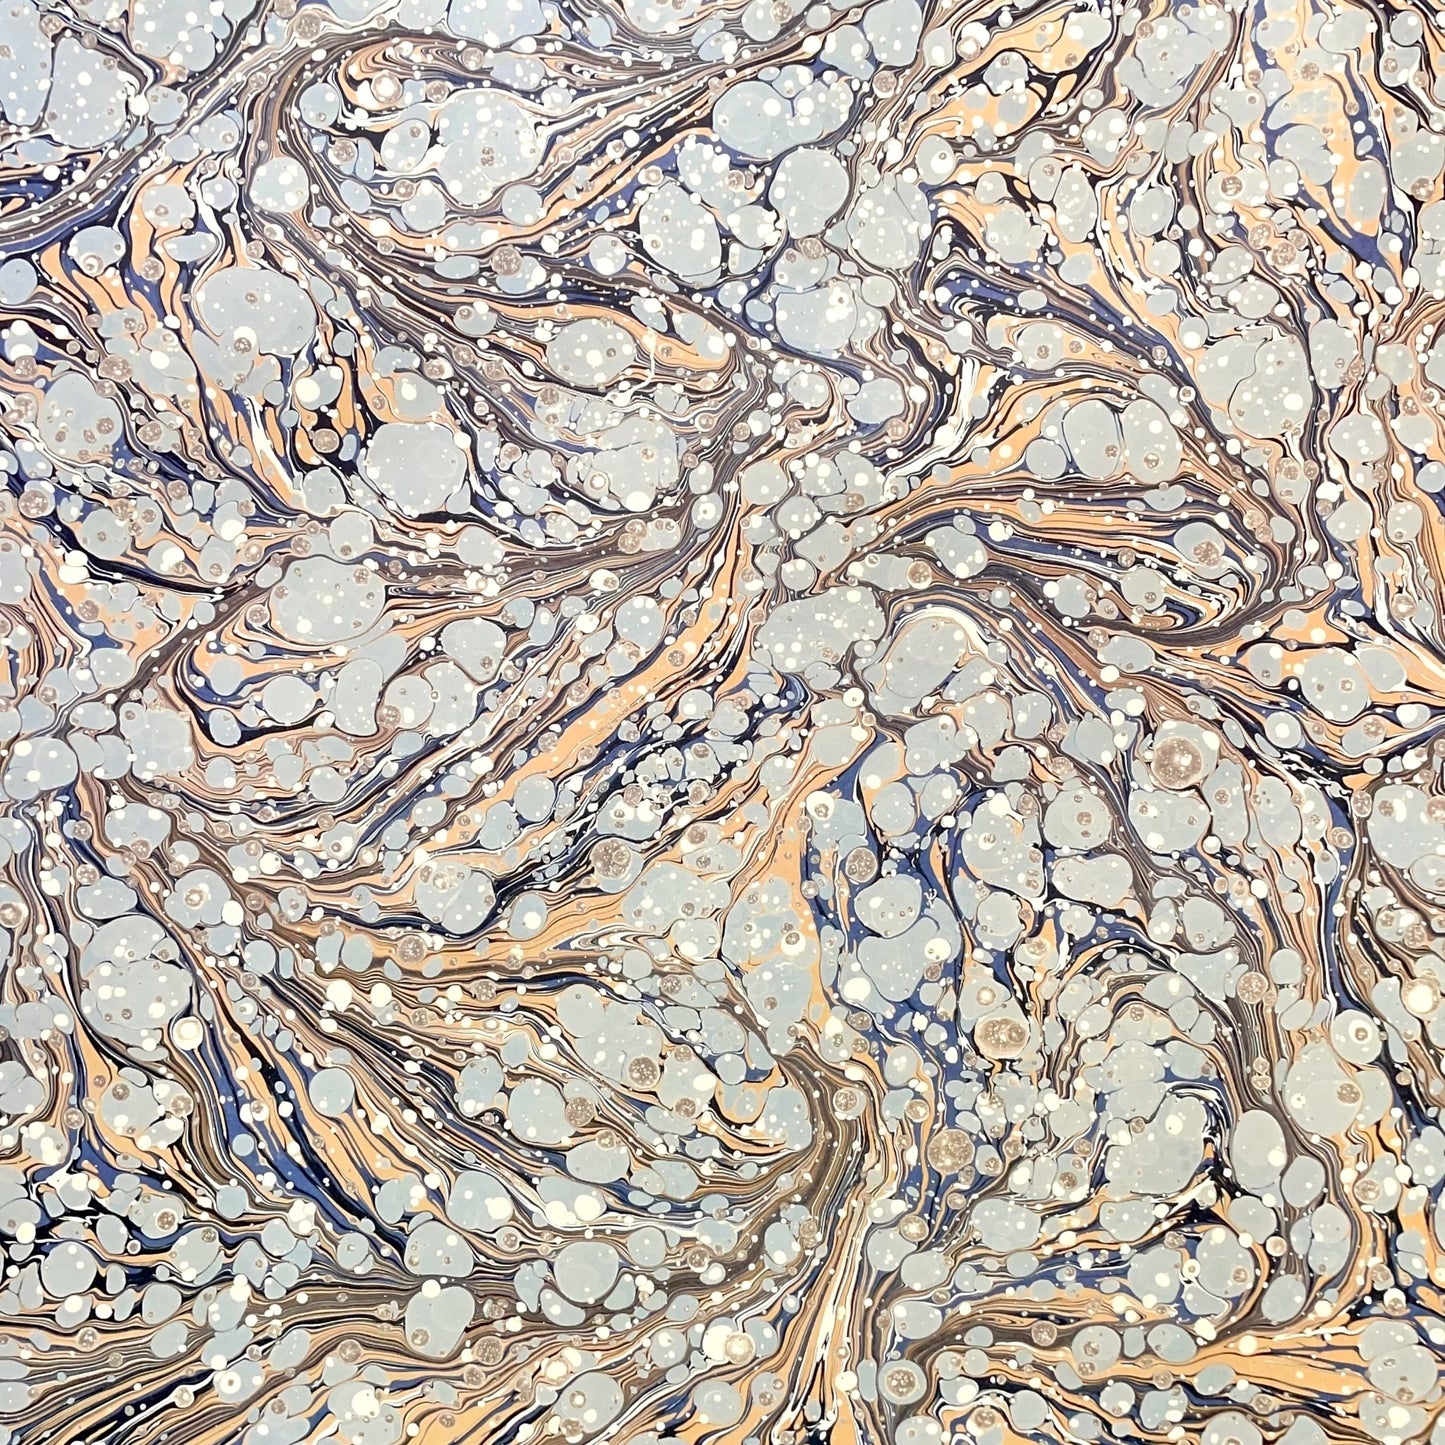 Printed marbled wrapping paper by Jemma Lewis Marbling. Marbled paper in earth tones of brown, sand, grey and soft blue